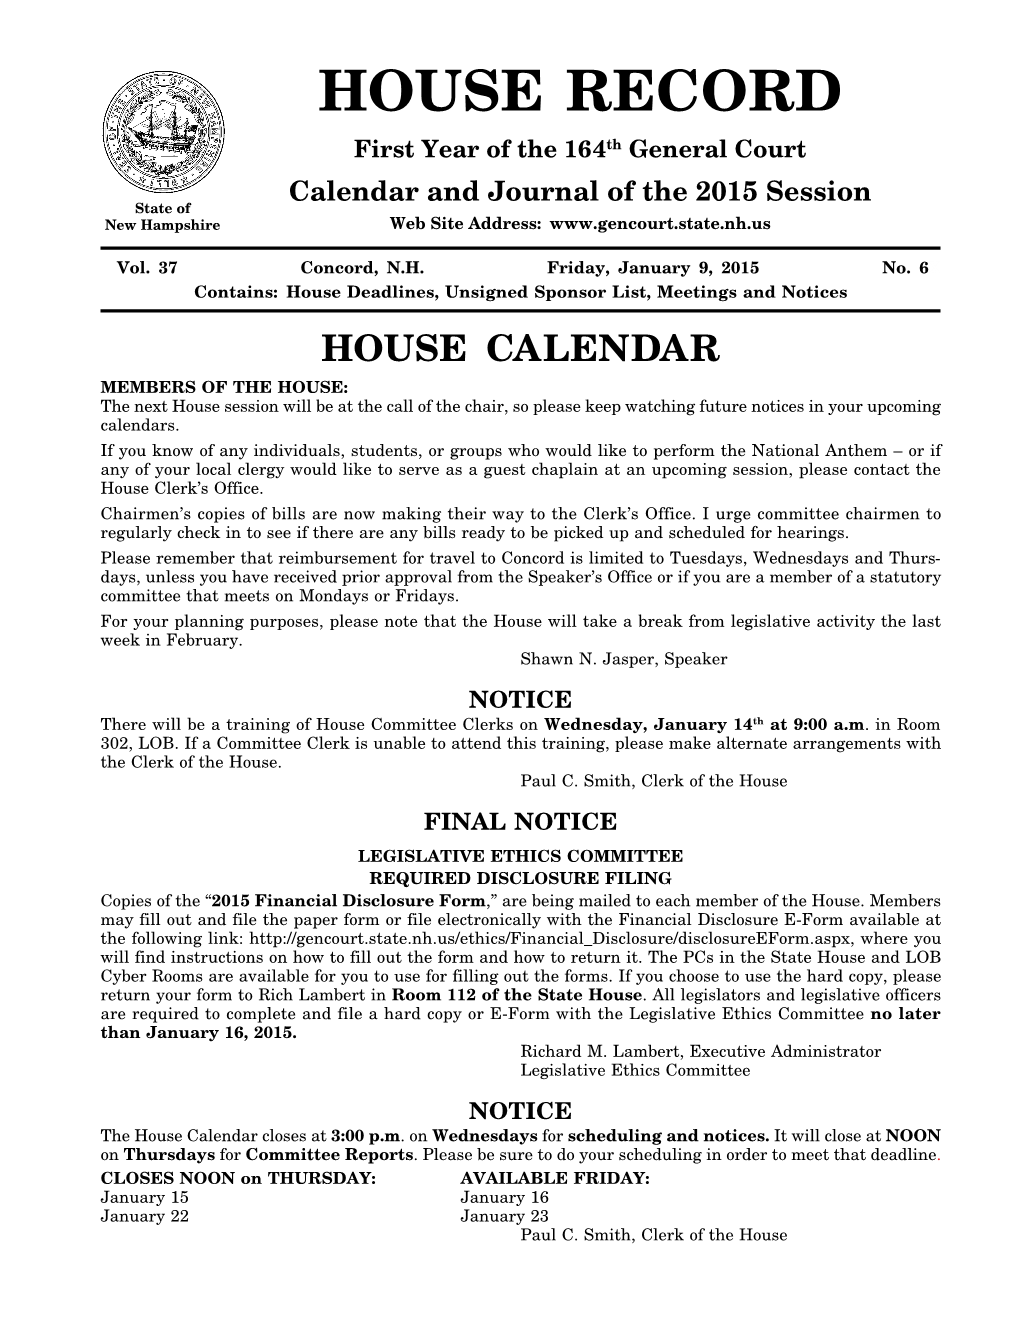 HOUSE CALENDAR MEMBERS of the HOUSE: the Next House Session Will Be at the Call of the Chair, So Please Keep Watching Future Notices in Your Upcoming Calendars